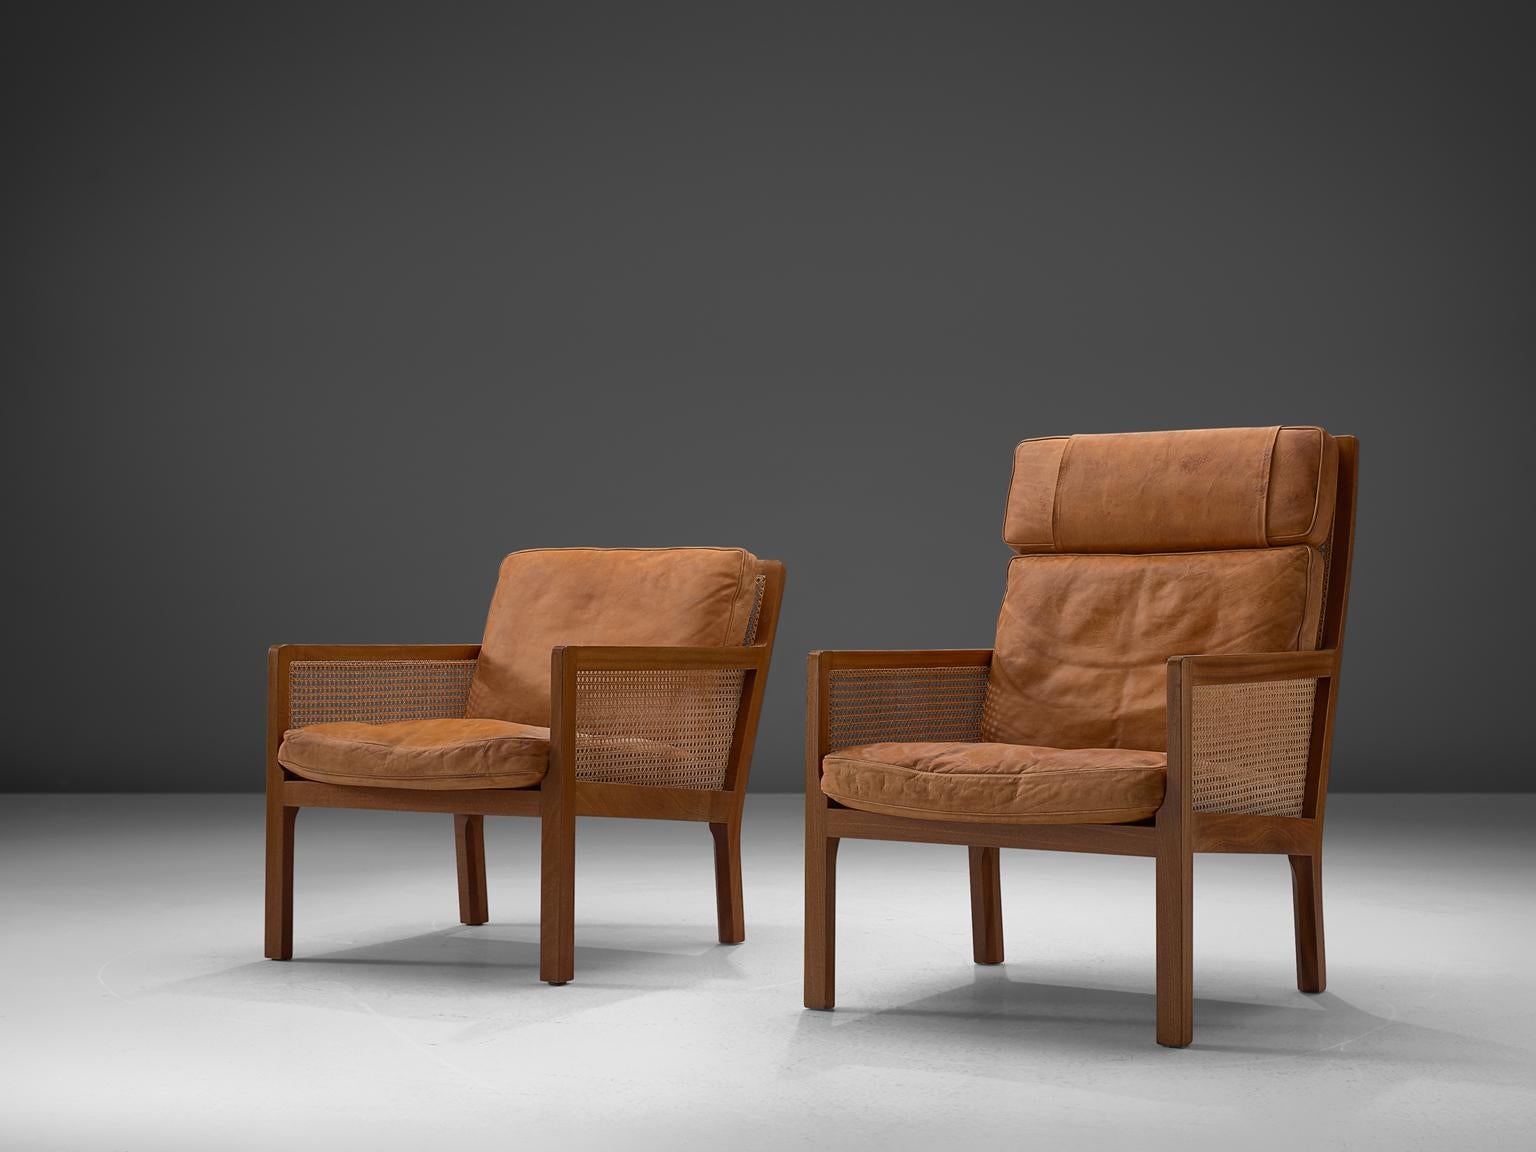 Bernt Petersen for Wørts Møbelsnedkeri, Adam & Eve lounge chairs, in mahogany, cane and leather, Denmark, 1964. 

Set of his and hers armchairs in mahogany and cane, upholstered with loose cushions in patinated cognac leather. The design is quite